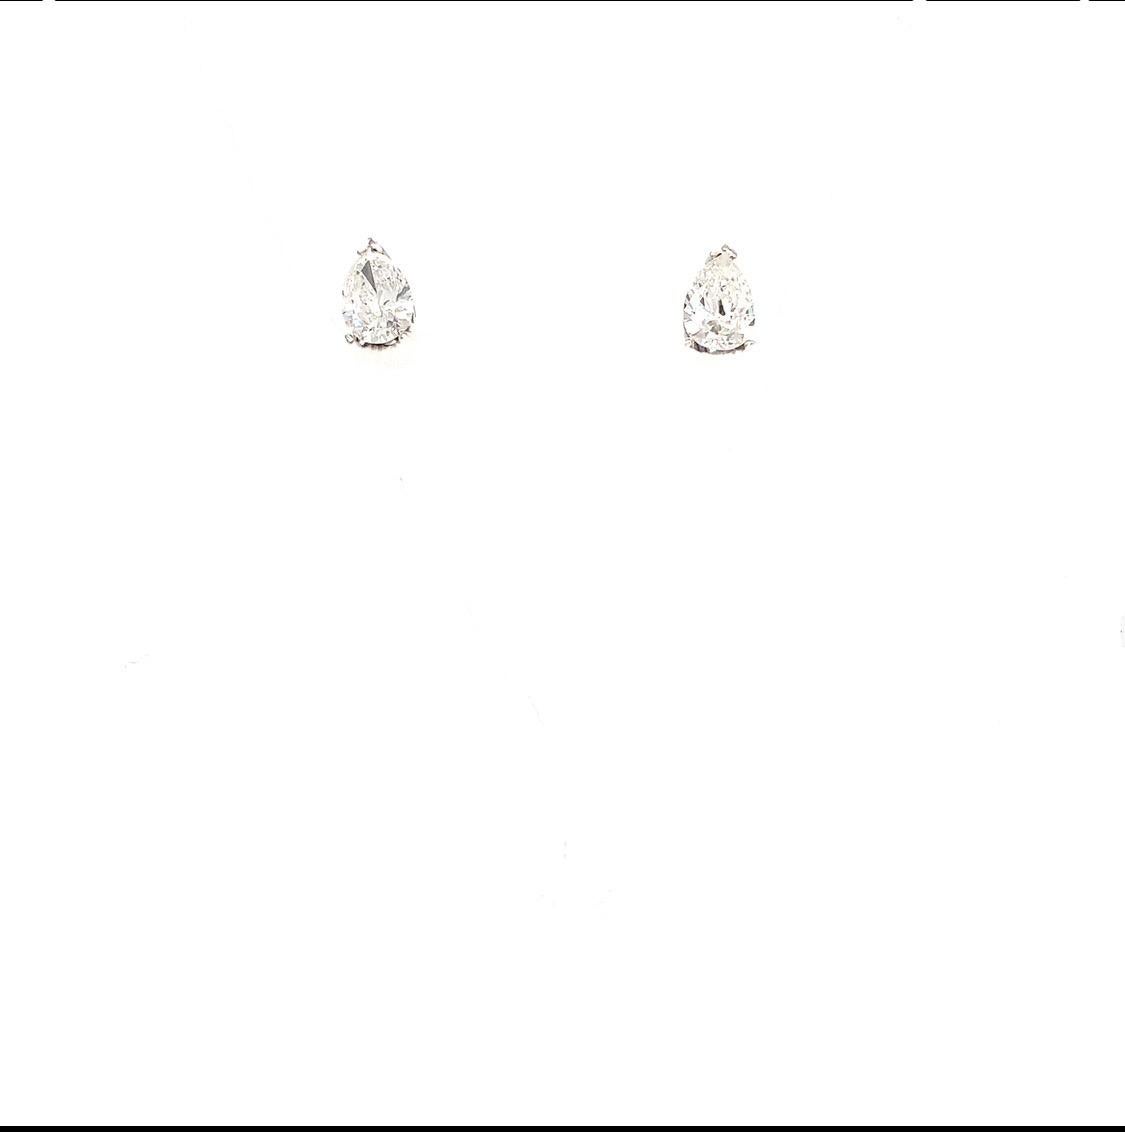 Pear diamond solitaire stud earrings 18k white gold
pear cut diamond stud earrings total weight 1.55ct F 'G colour VS1 clarity
Beautiful feminine classic earrings for any ocassion.
Hallmarked
Claw setting
Classic solitaire stud earrings in 18k white